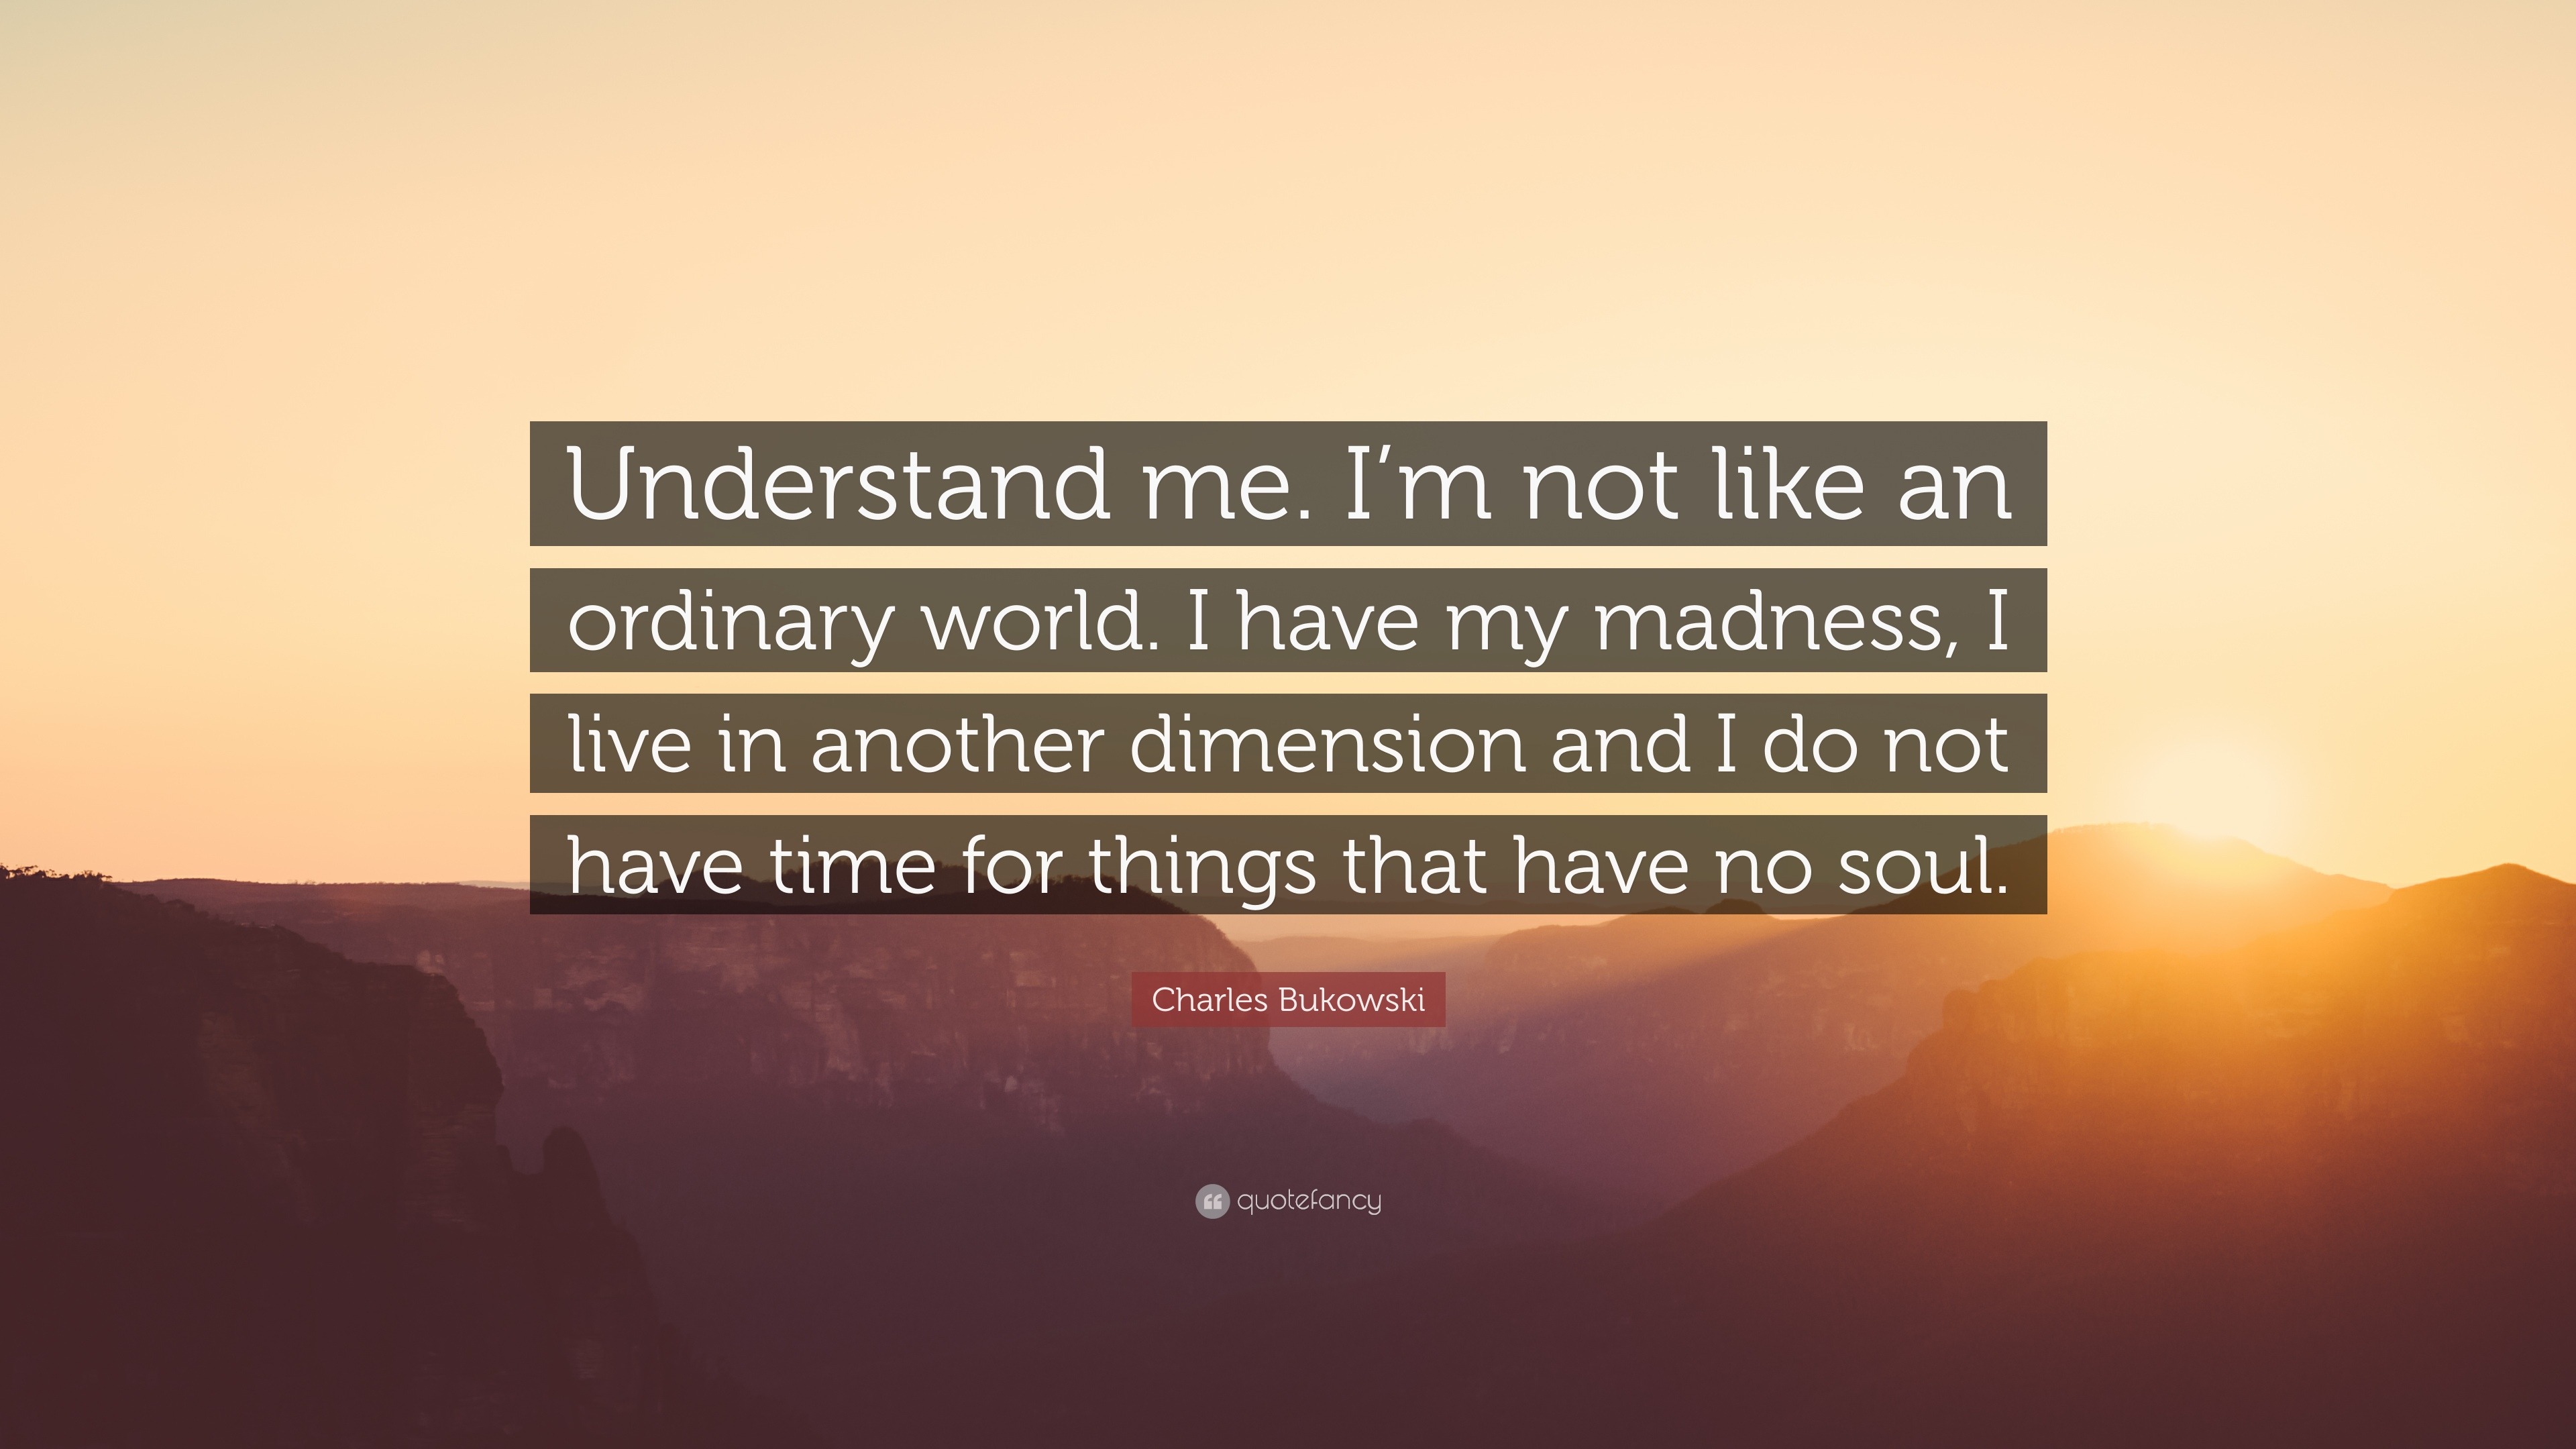 Charles Bukowski Quote: “Understand me. I’m not like an ordinary world